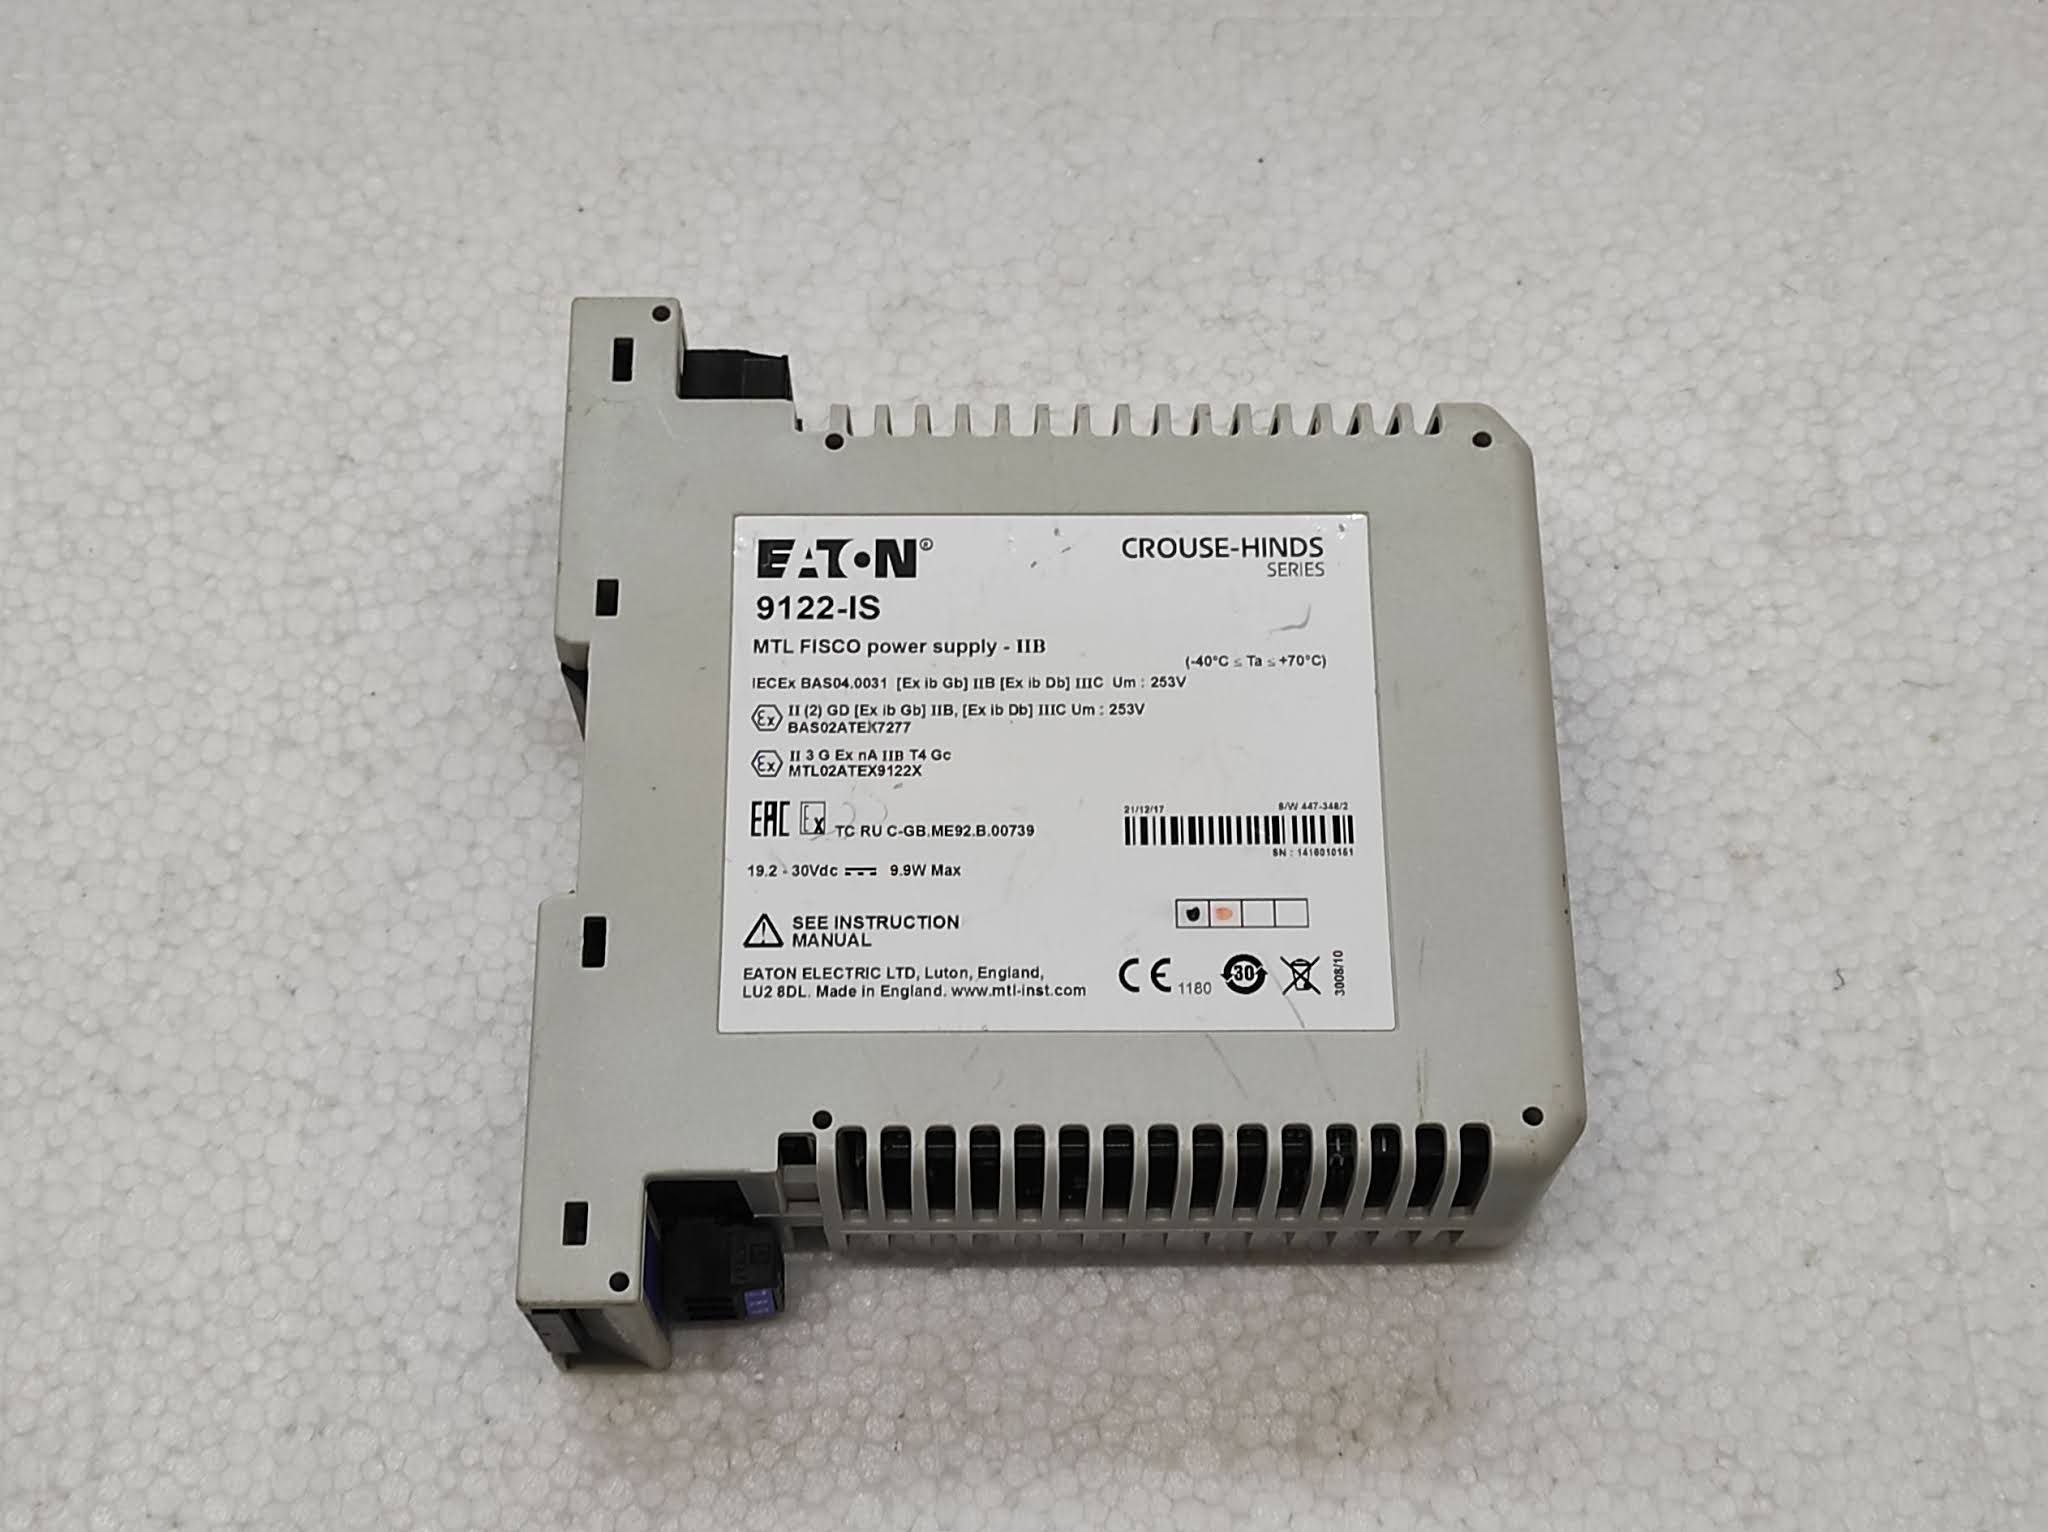 Eaton 9122-IS MTL Fisco Power Supply IIB Crouse-Hinds 